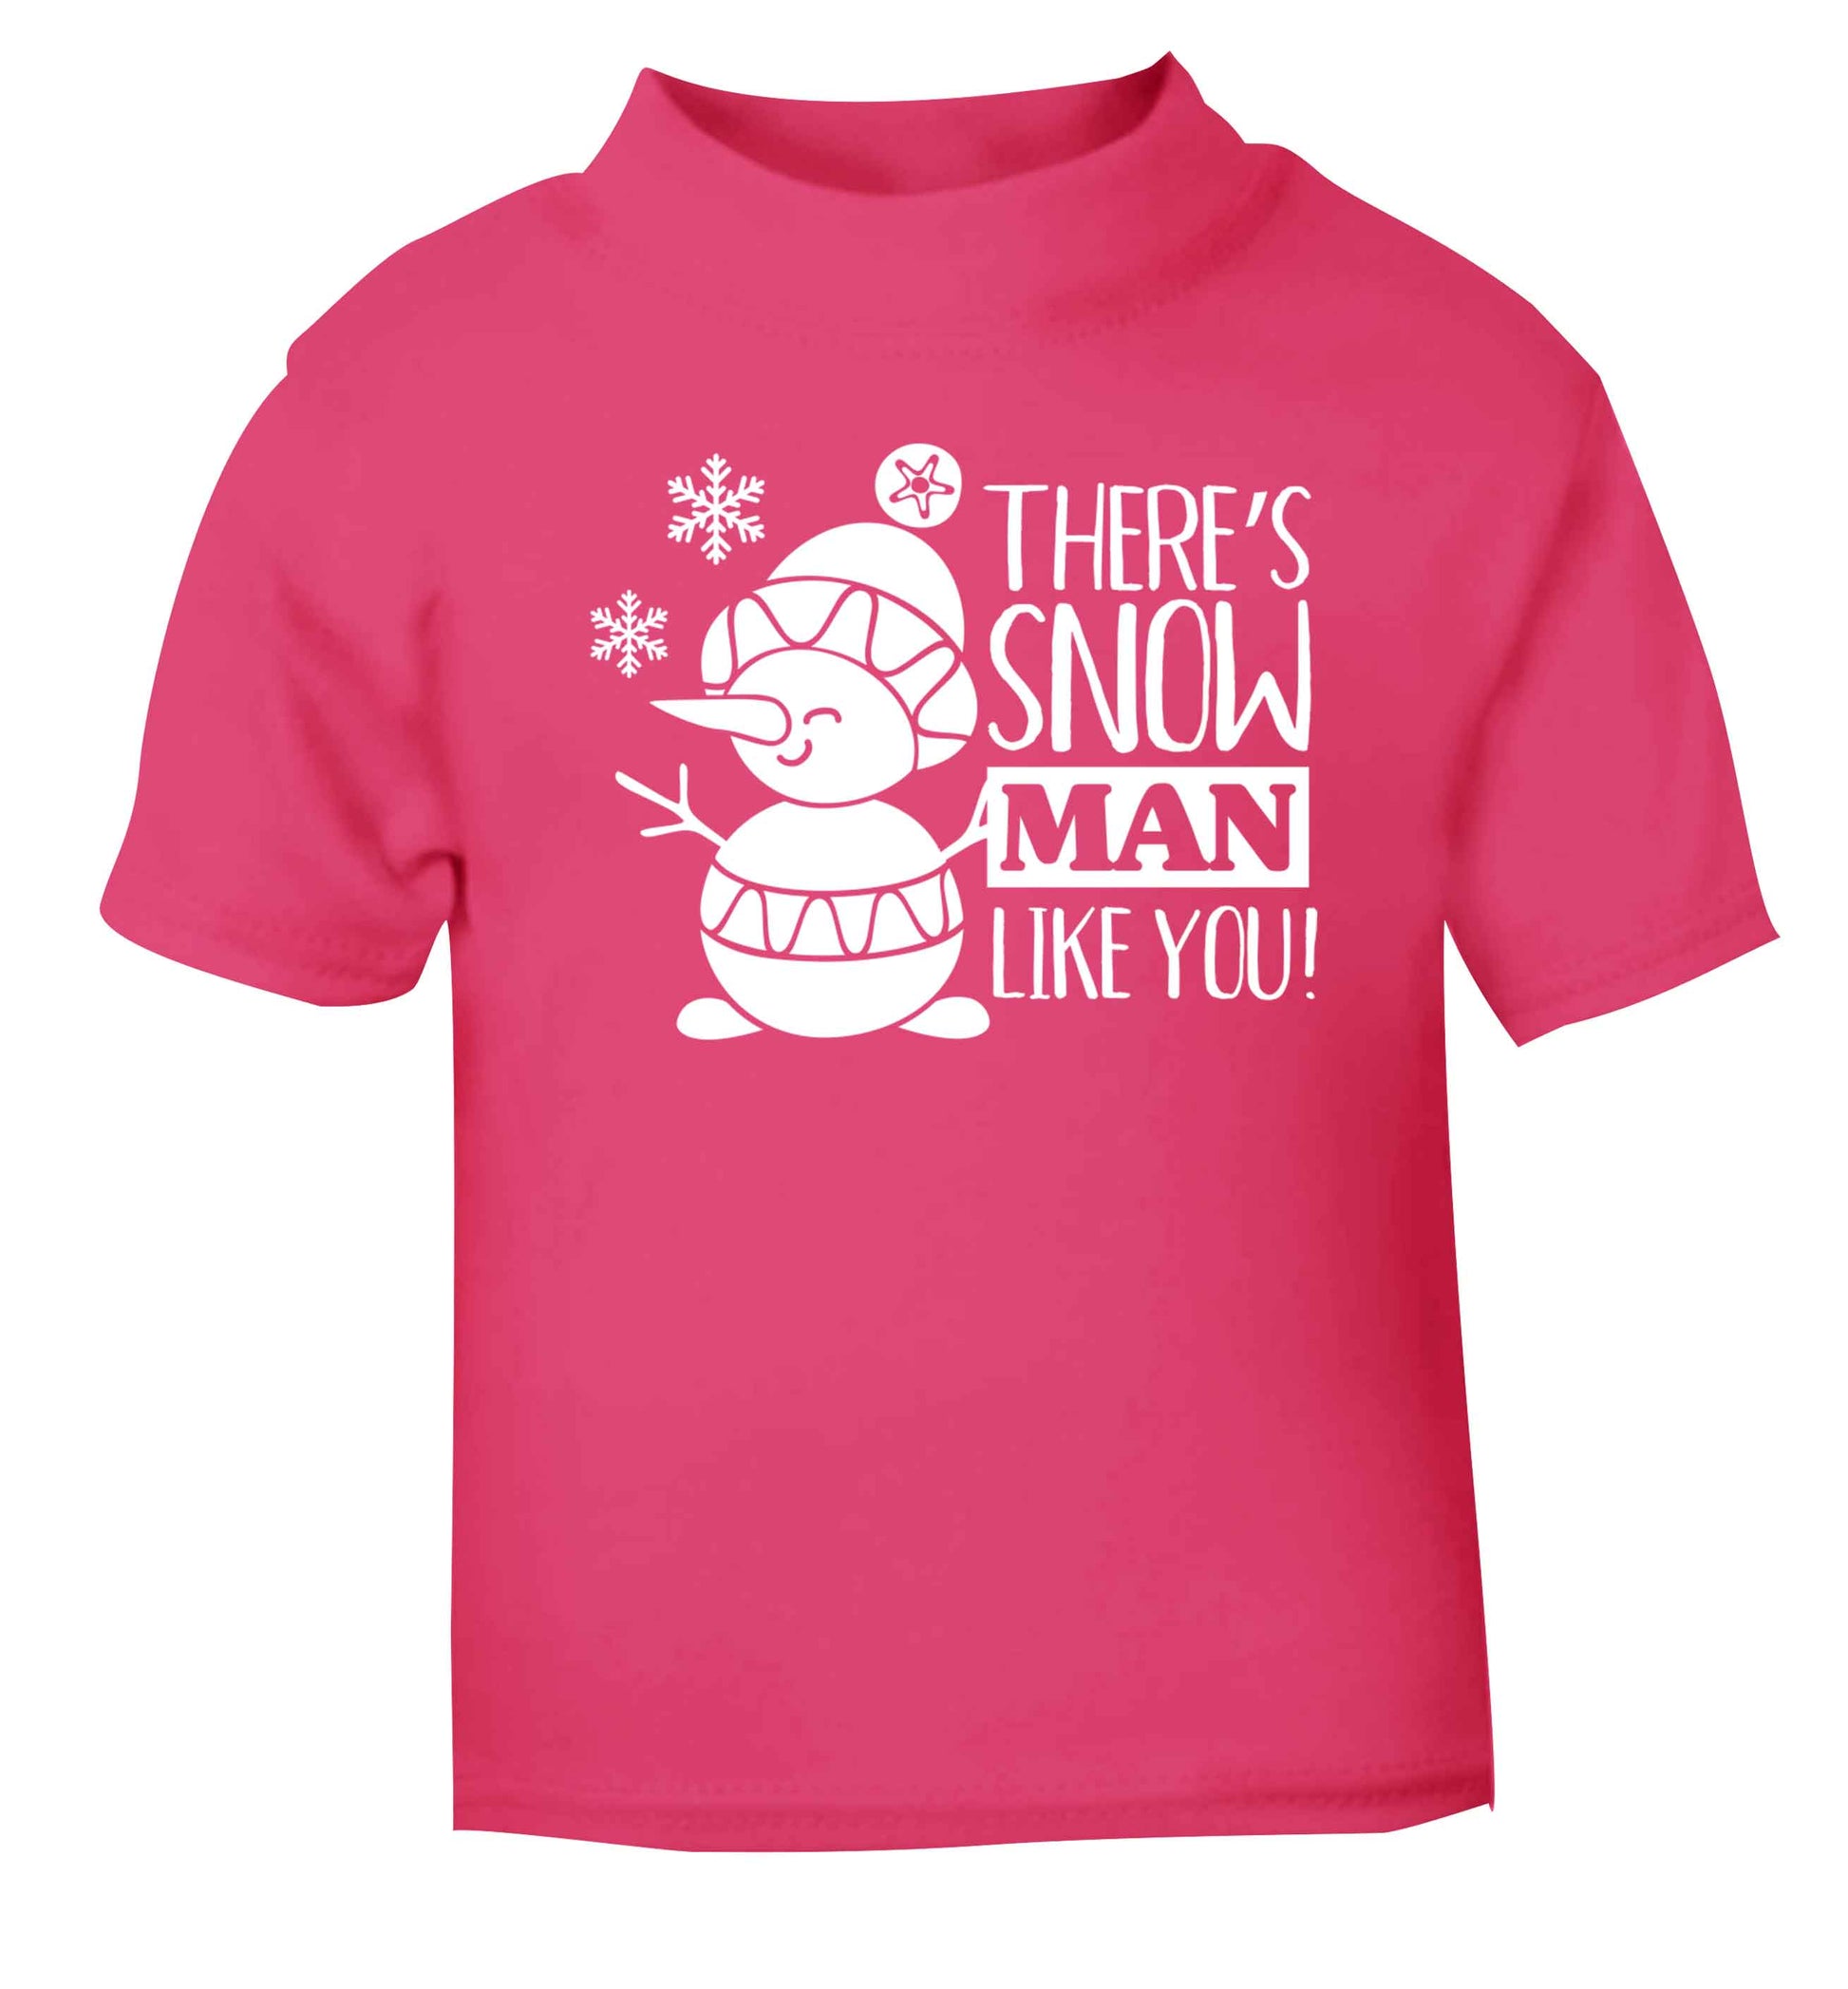 There's snow man like you pink baby toddler Tshirt 2 Years